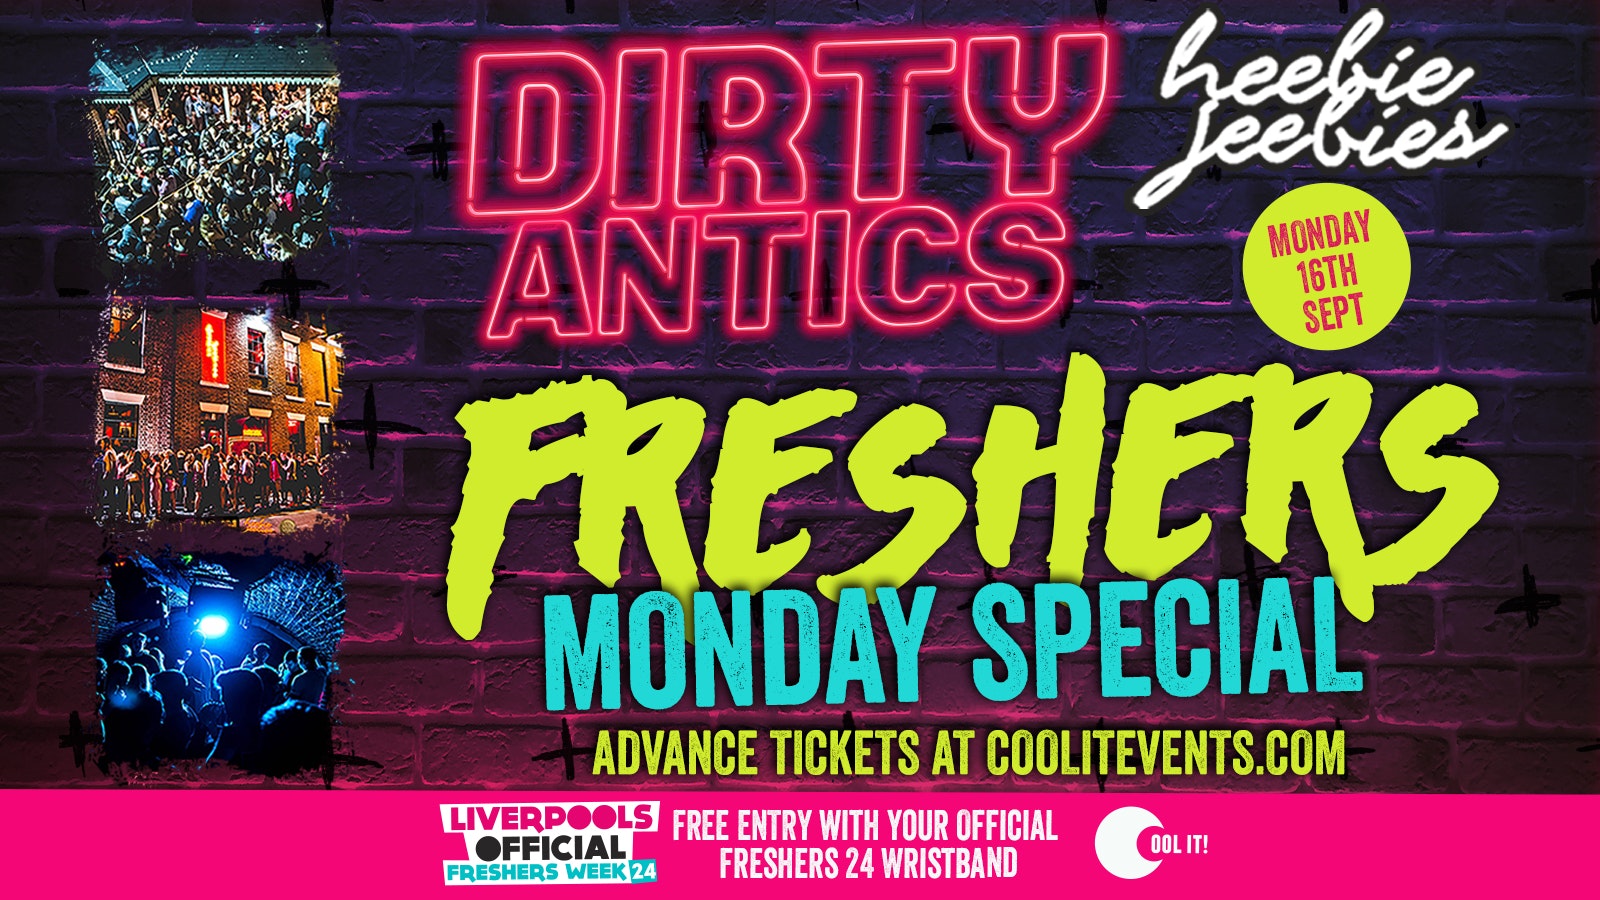 DAY 2 – OFFICIAL EVENT 2 – DIRTY ANTICS FRESHERS MONDAY SPECIAL